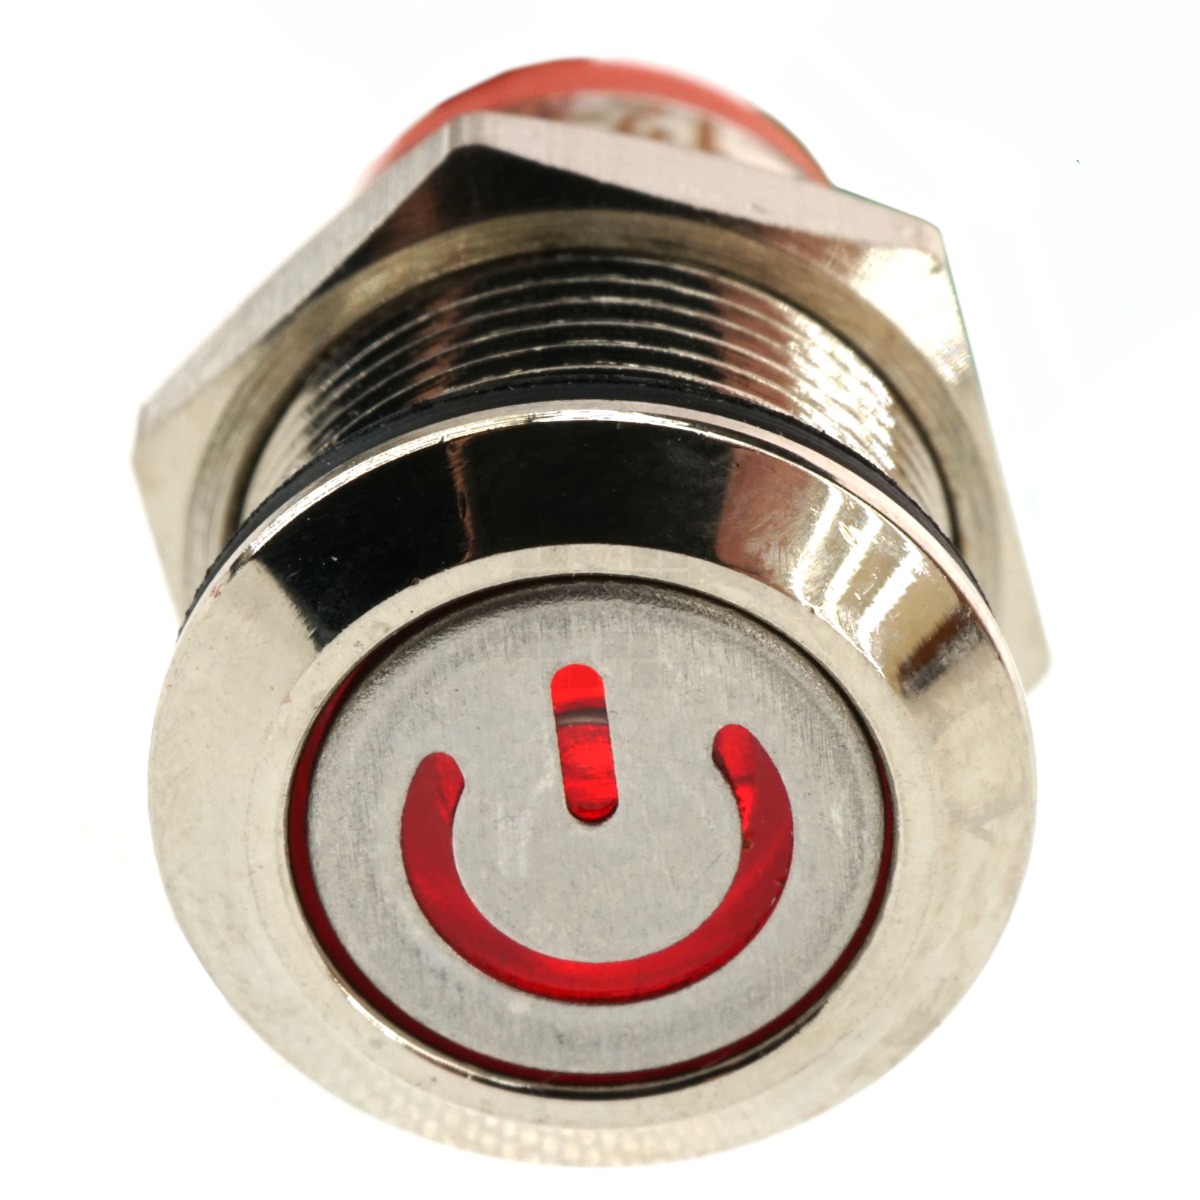 12mm Threaded Metal Pushbutton, Momentary, Red LED, 12-24VDC, IP65, SPST, Power